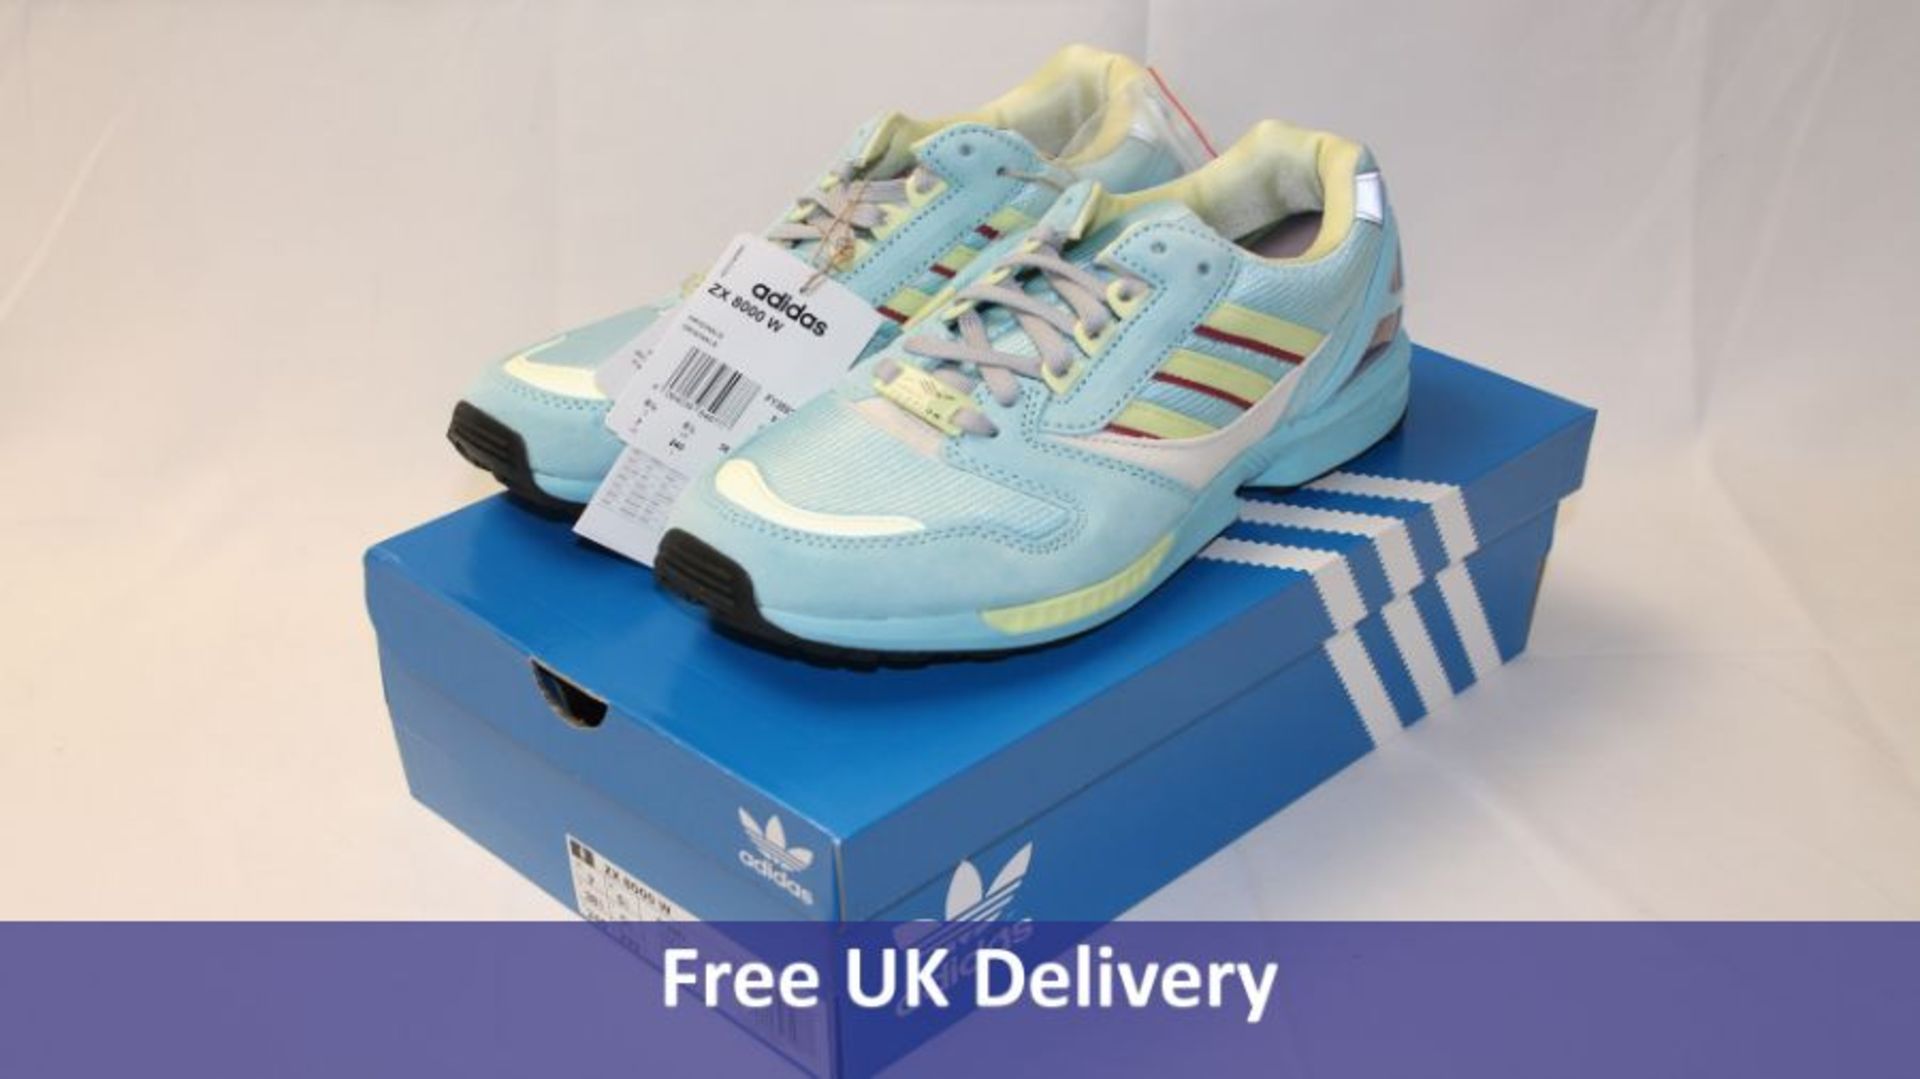 Adidas ZX 8000 Women's Trainers, Sky colour yellow/pink highlights, UK 5.5